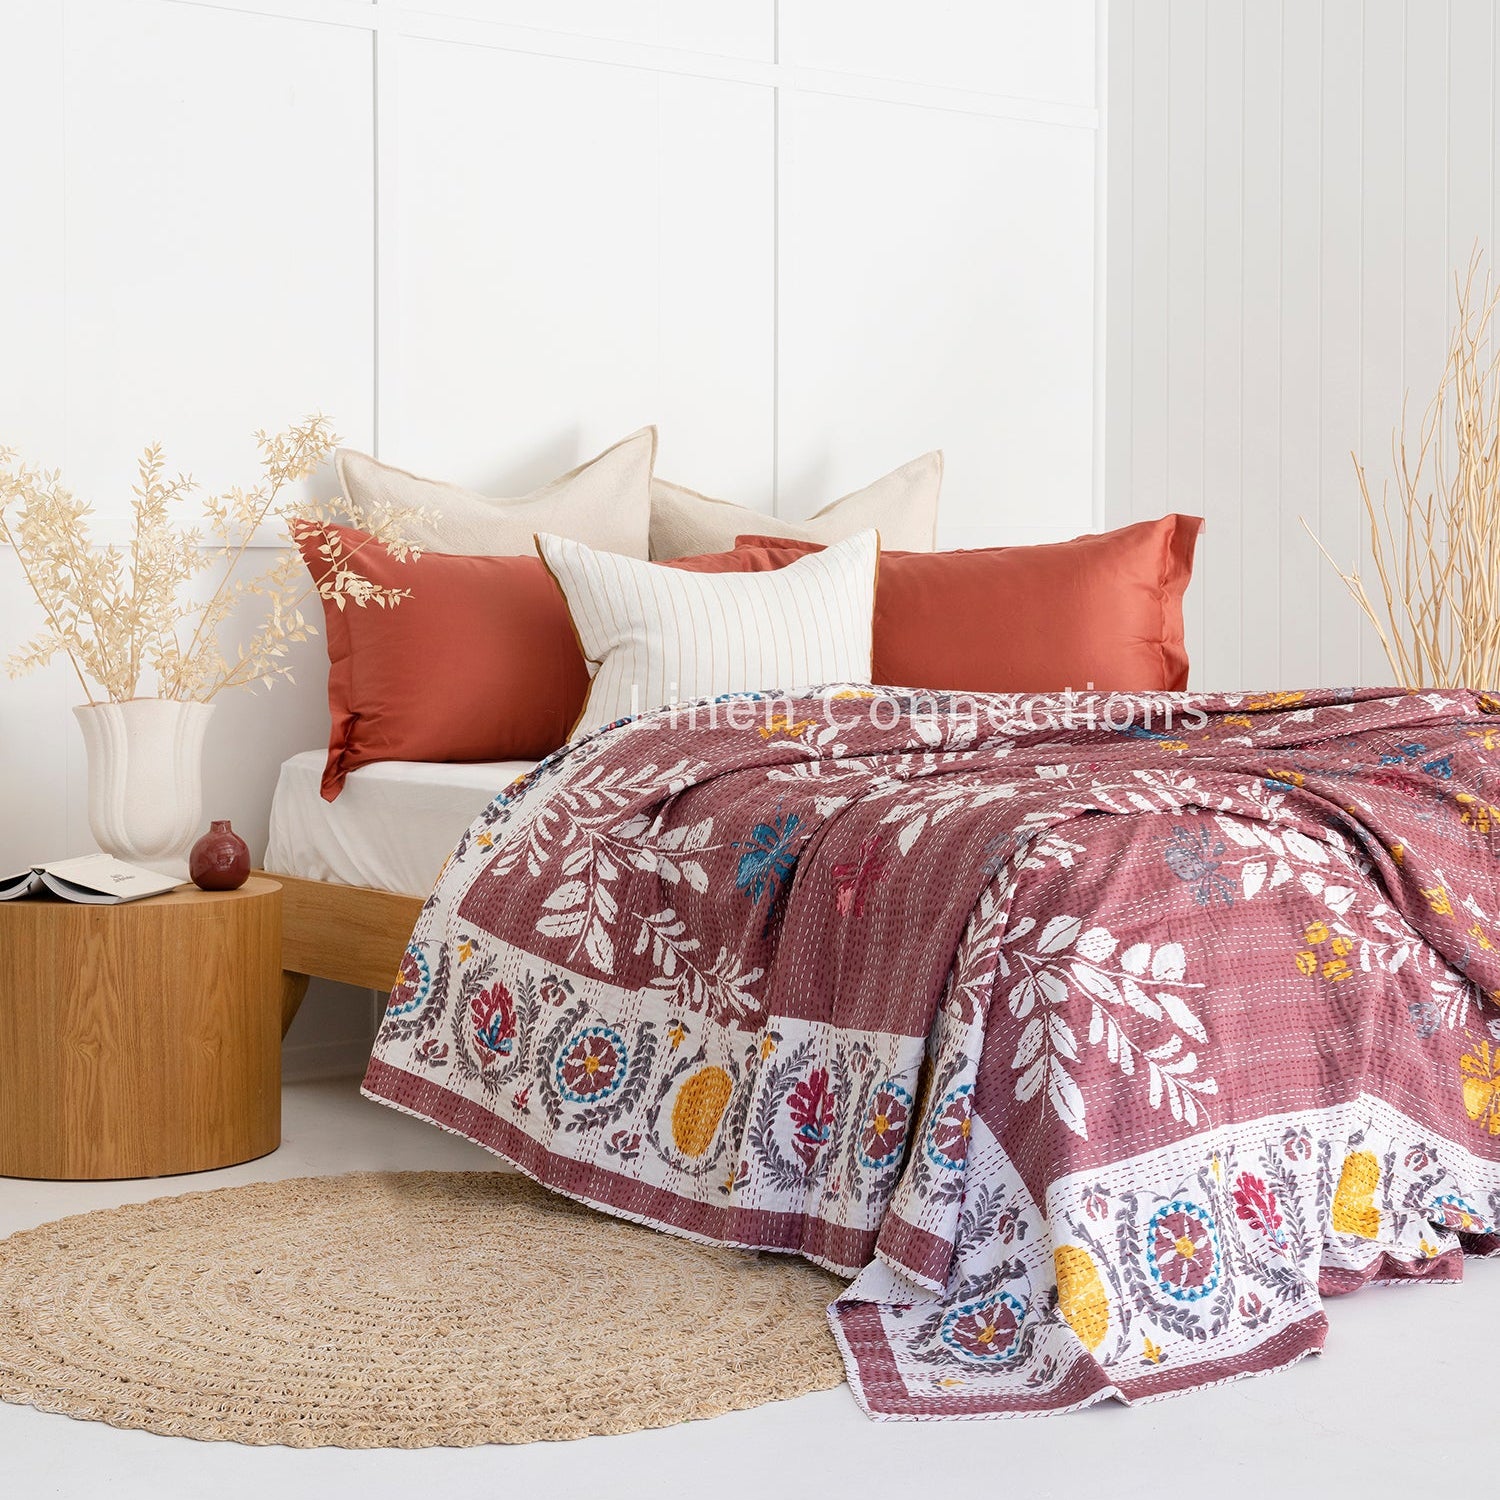 Linen Connections Indian Kantha Quilt - Red Bath